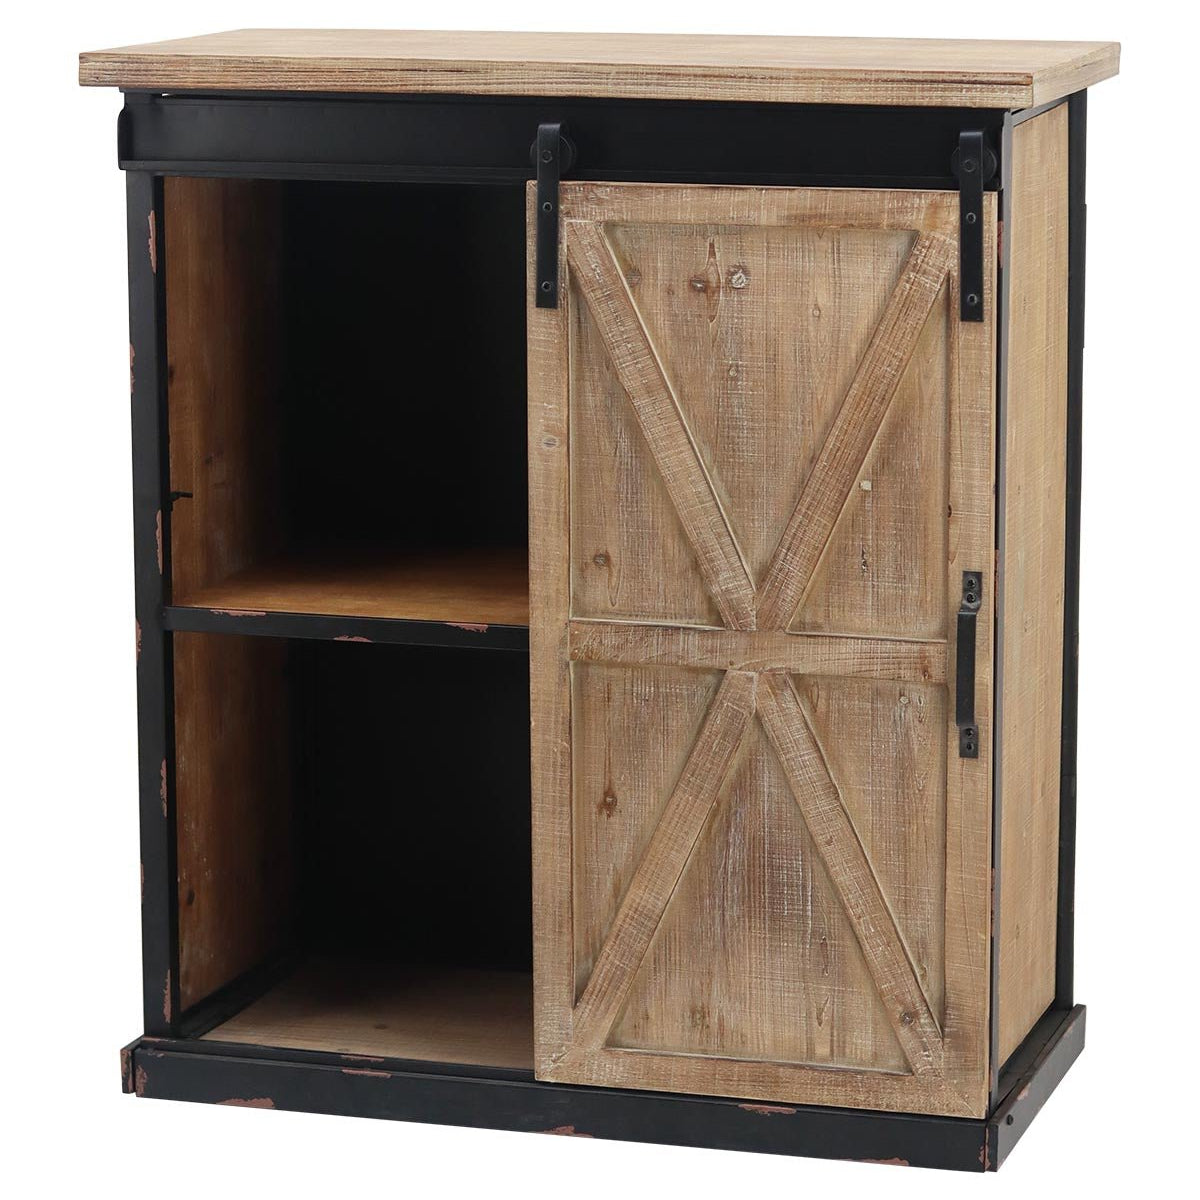 Rustic Wood Rectangle End Table, Decorative Wood Table for Bedroom Living Room - Storage Cabinets